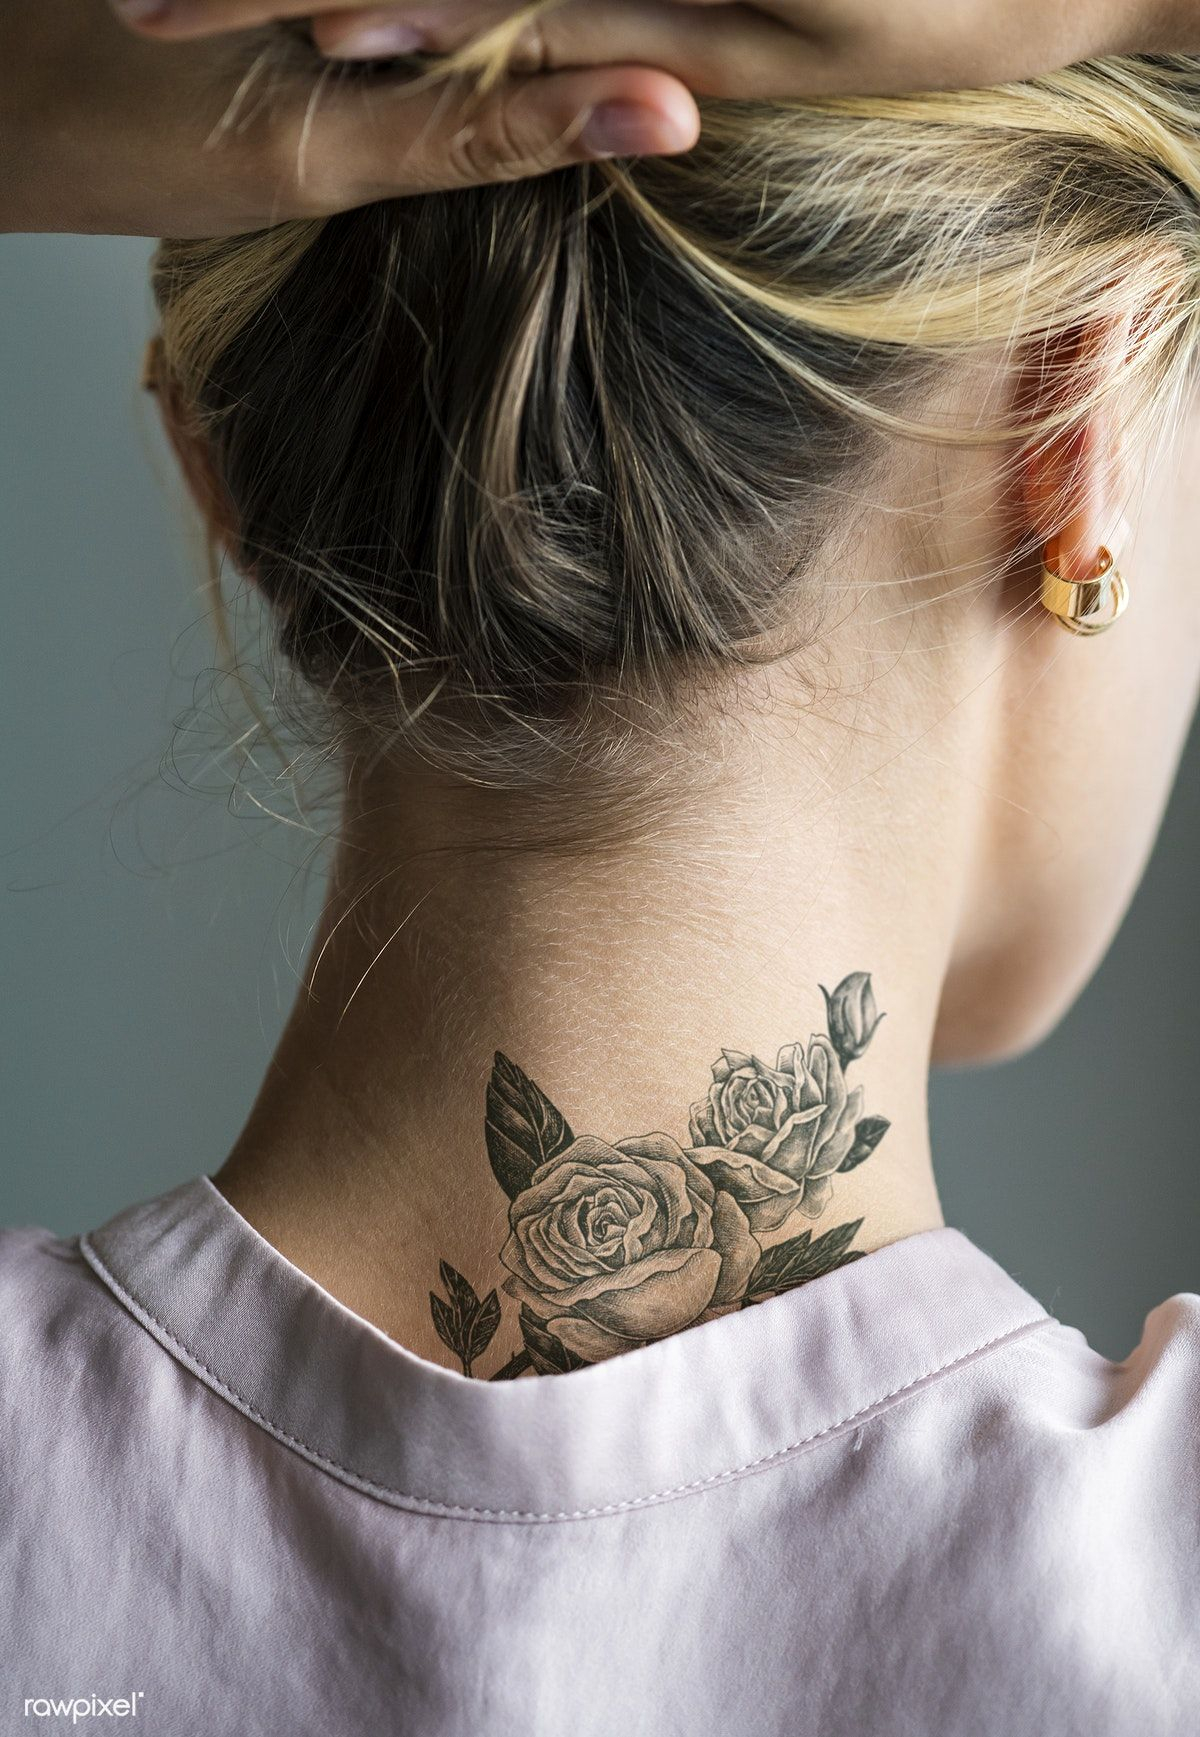 Download Premium Psd Of Back Neck Tattoo Of A Woman 383879 Tattoo for size 1200 X 1737